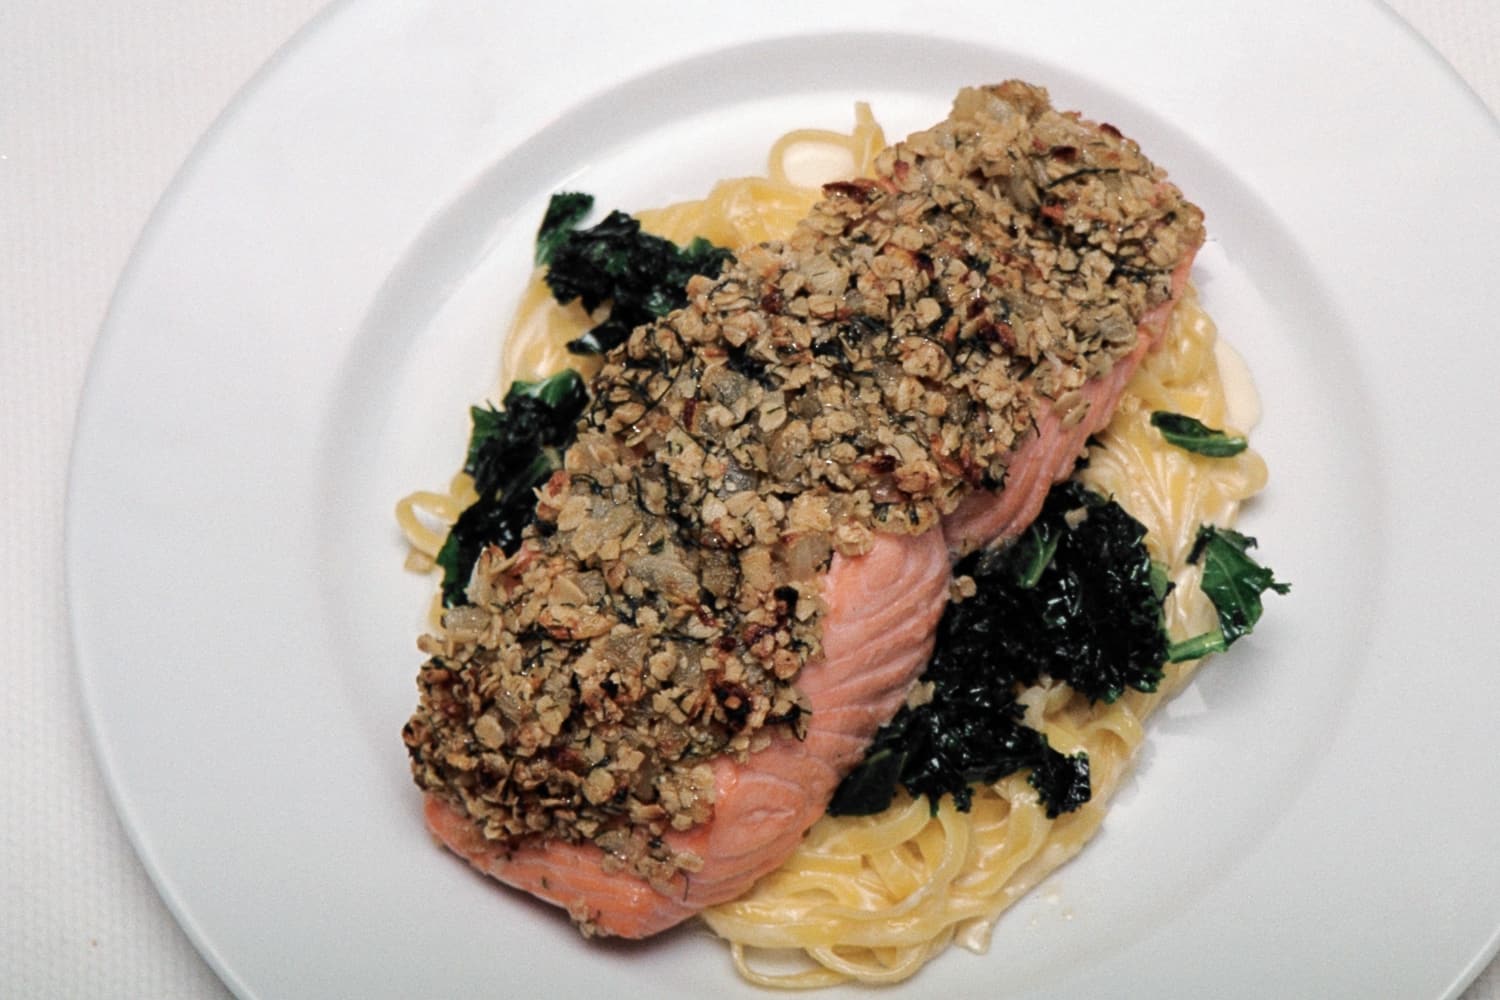 Salmon Fillets with a Skirlie Crust on Kale and Fettuccine